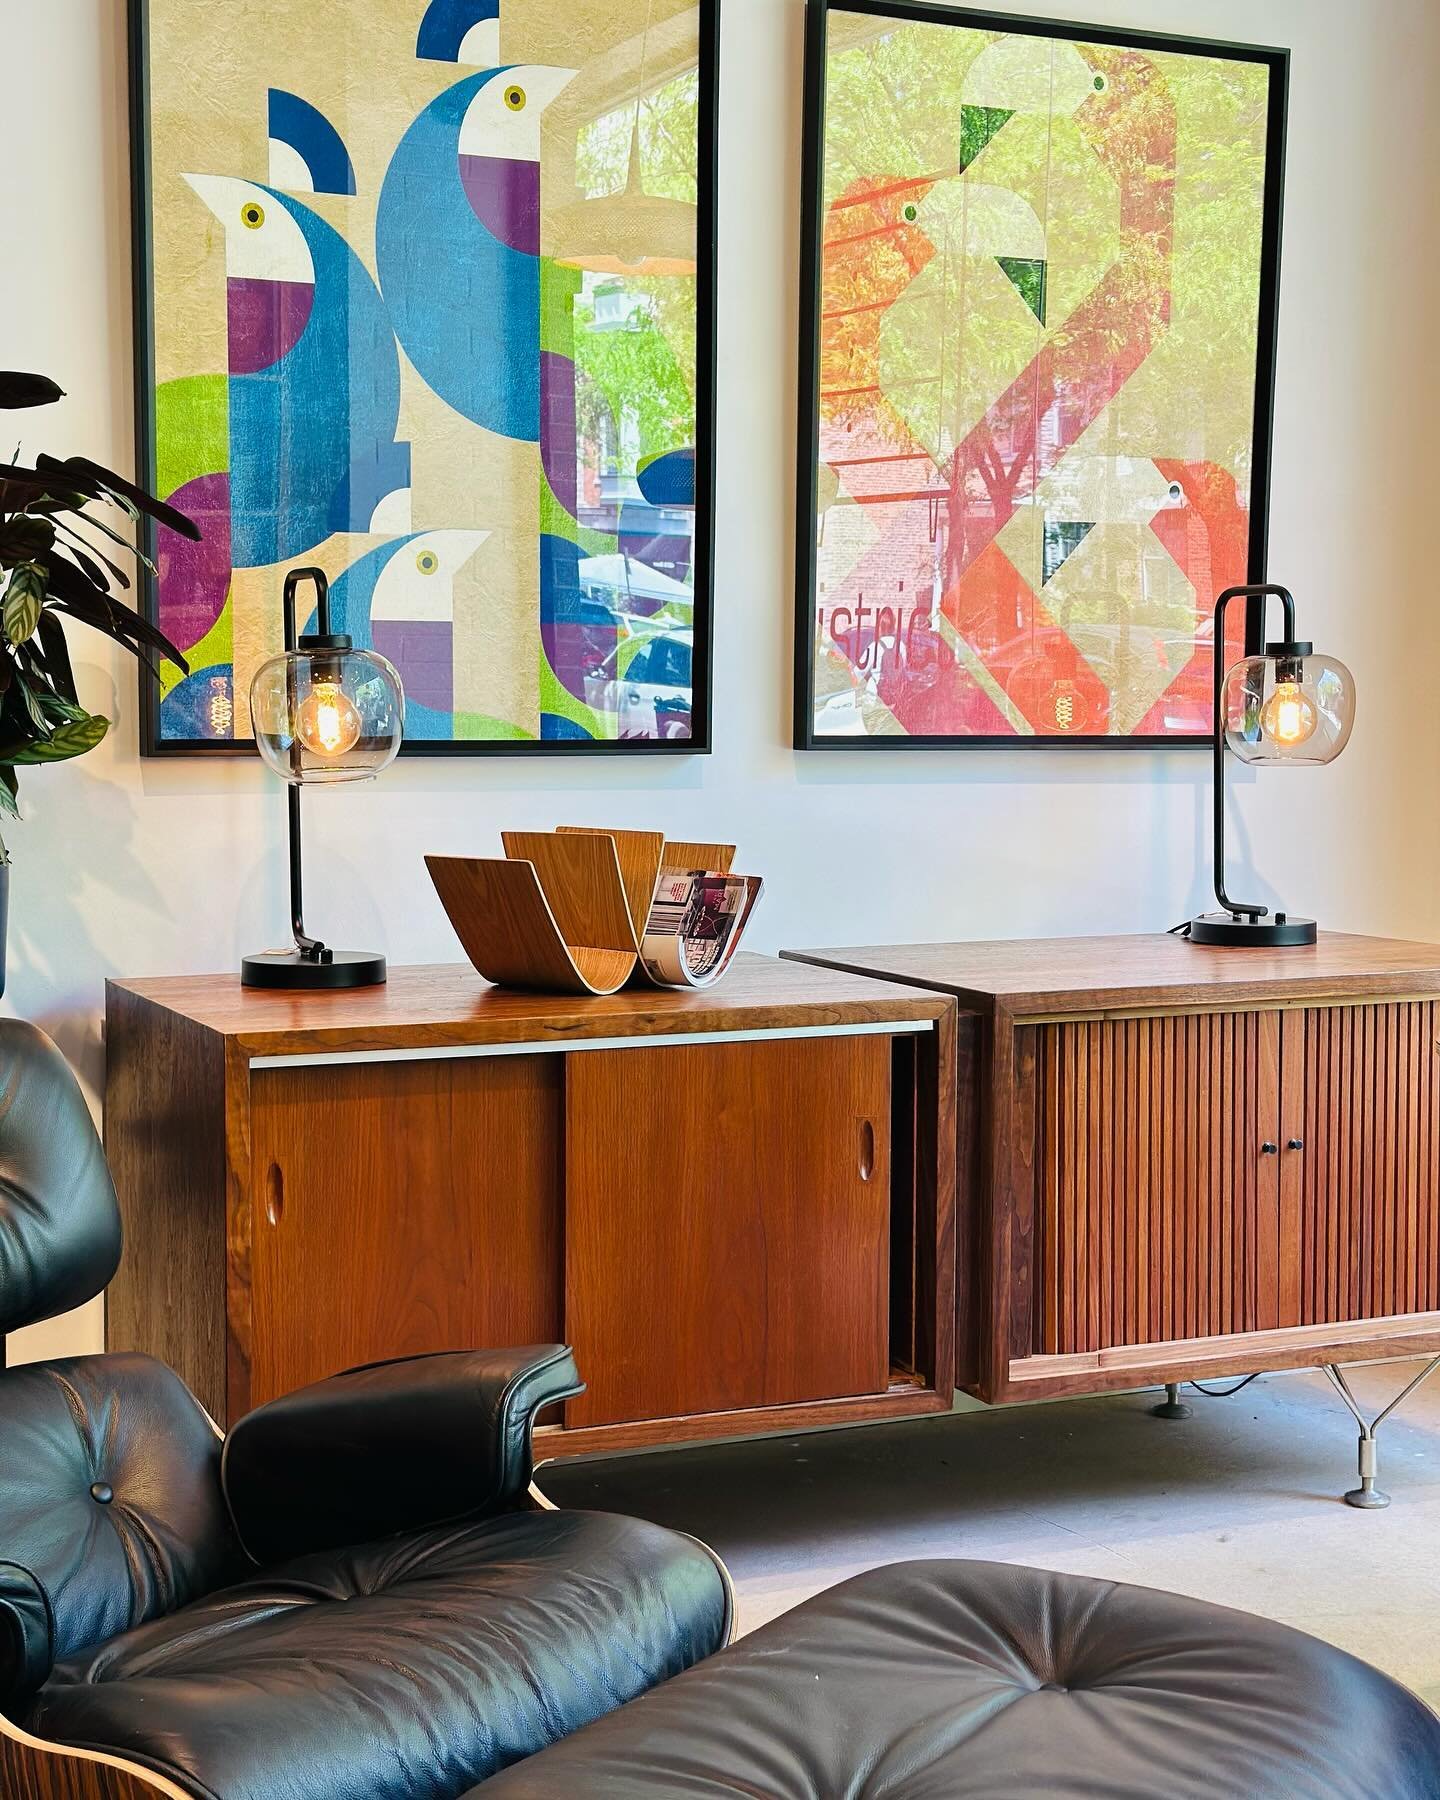 Happy Sunday y&rsquo;all! Get yourself some sunshine and stroll on over to see what&rsquo;s new. Here till 5! 😊

#districtchicago #midcenturystyle #findsomeinspo #lovethespaceyourein #shoplocal